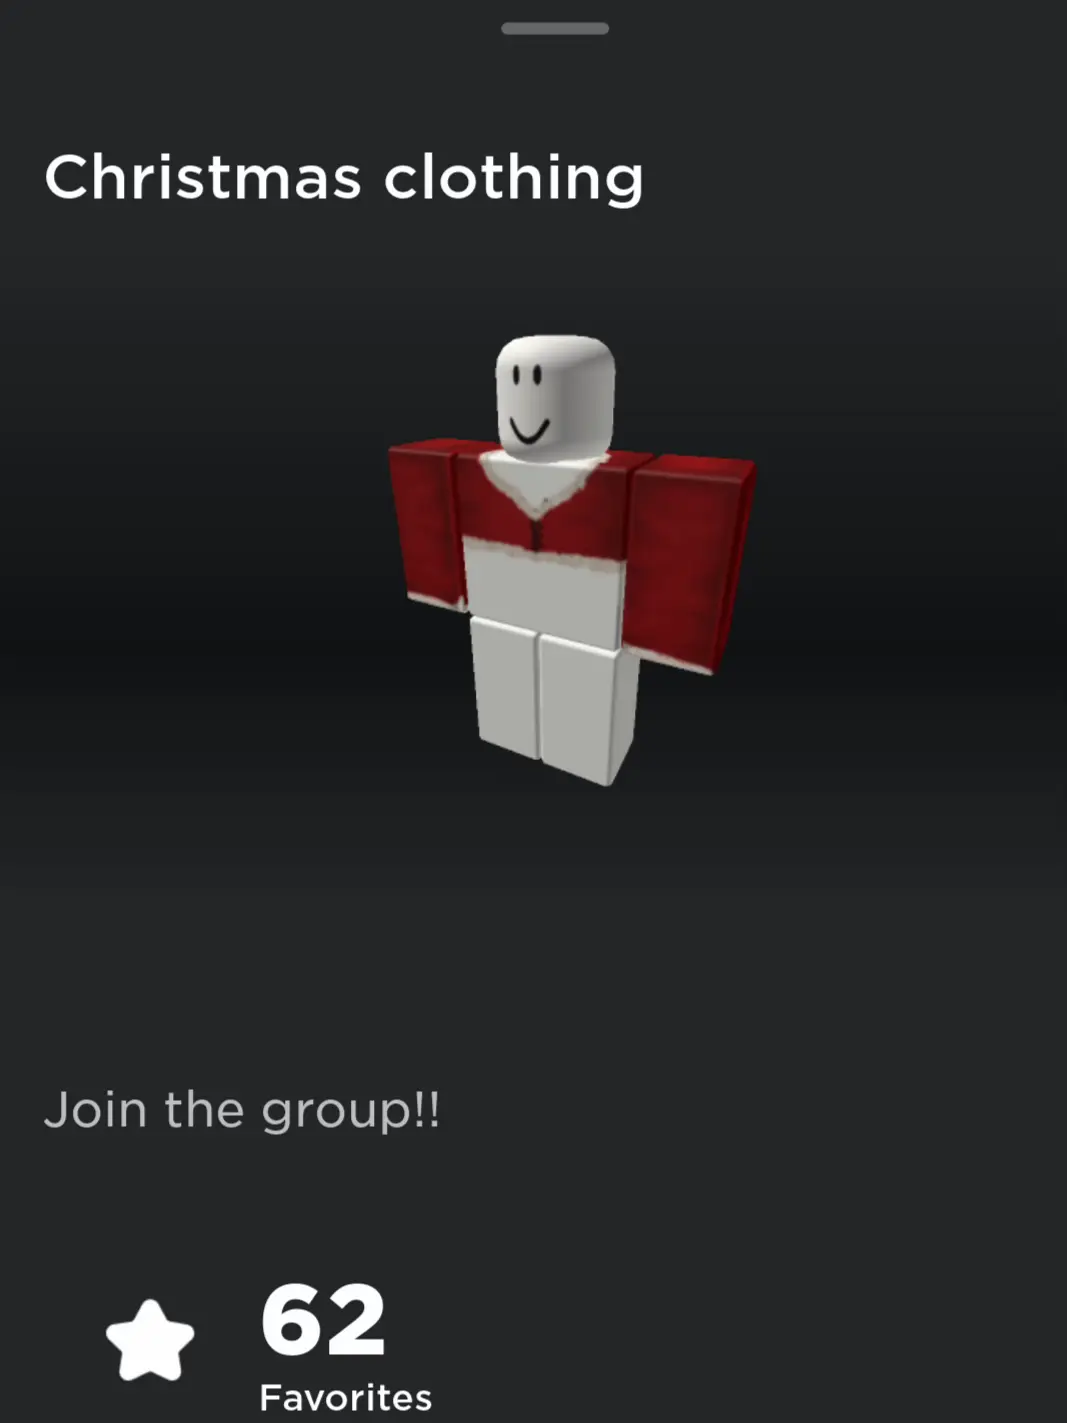 🎄 CHRISTMAS] Matching Outfits Avatar Ideas - Roblox